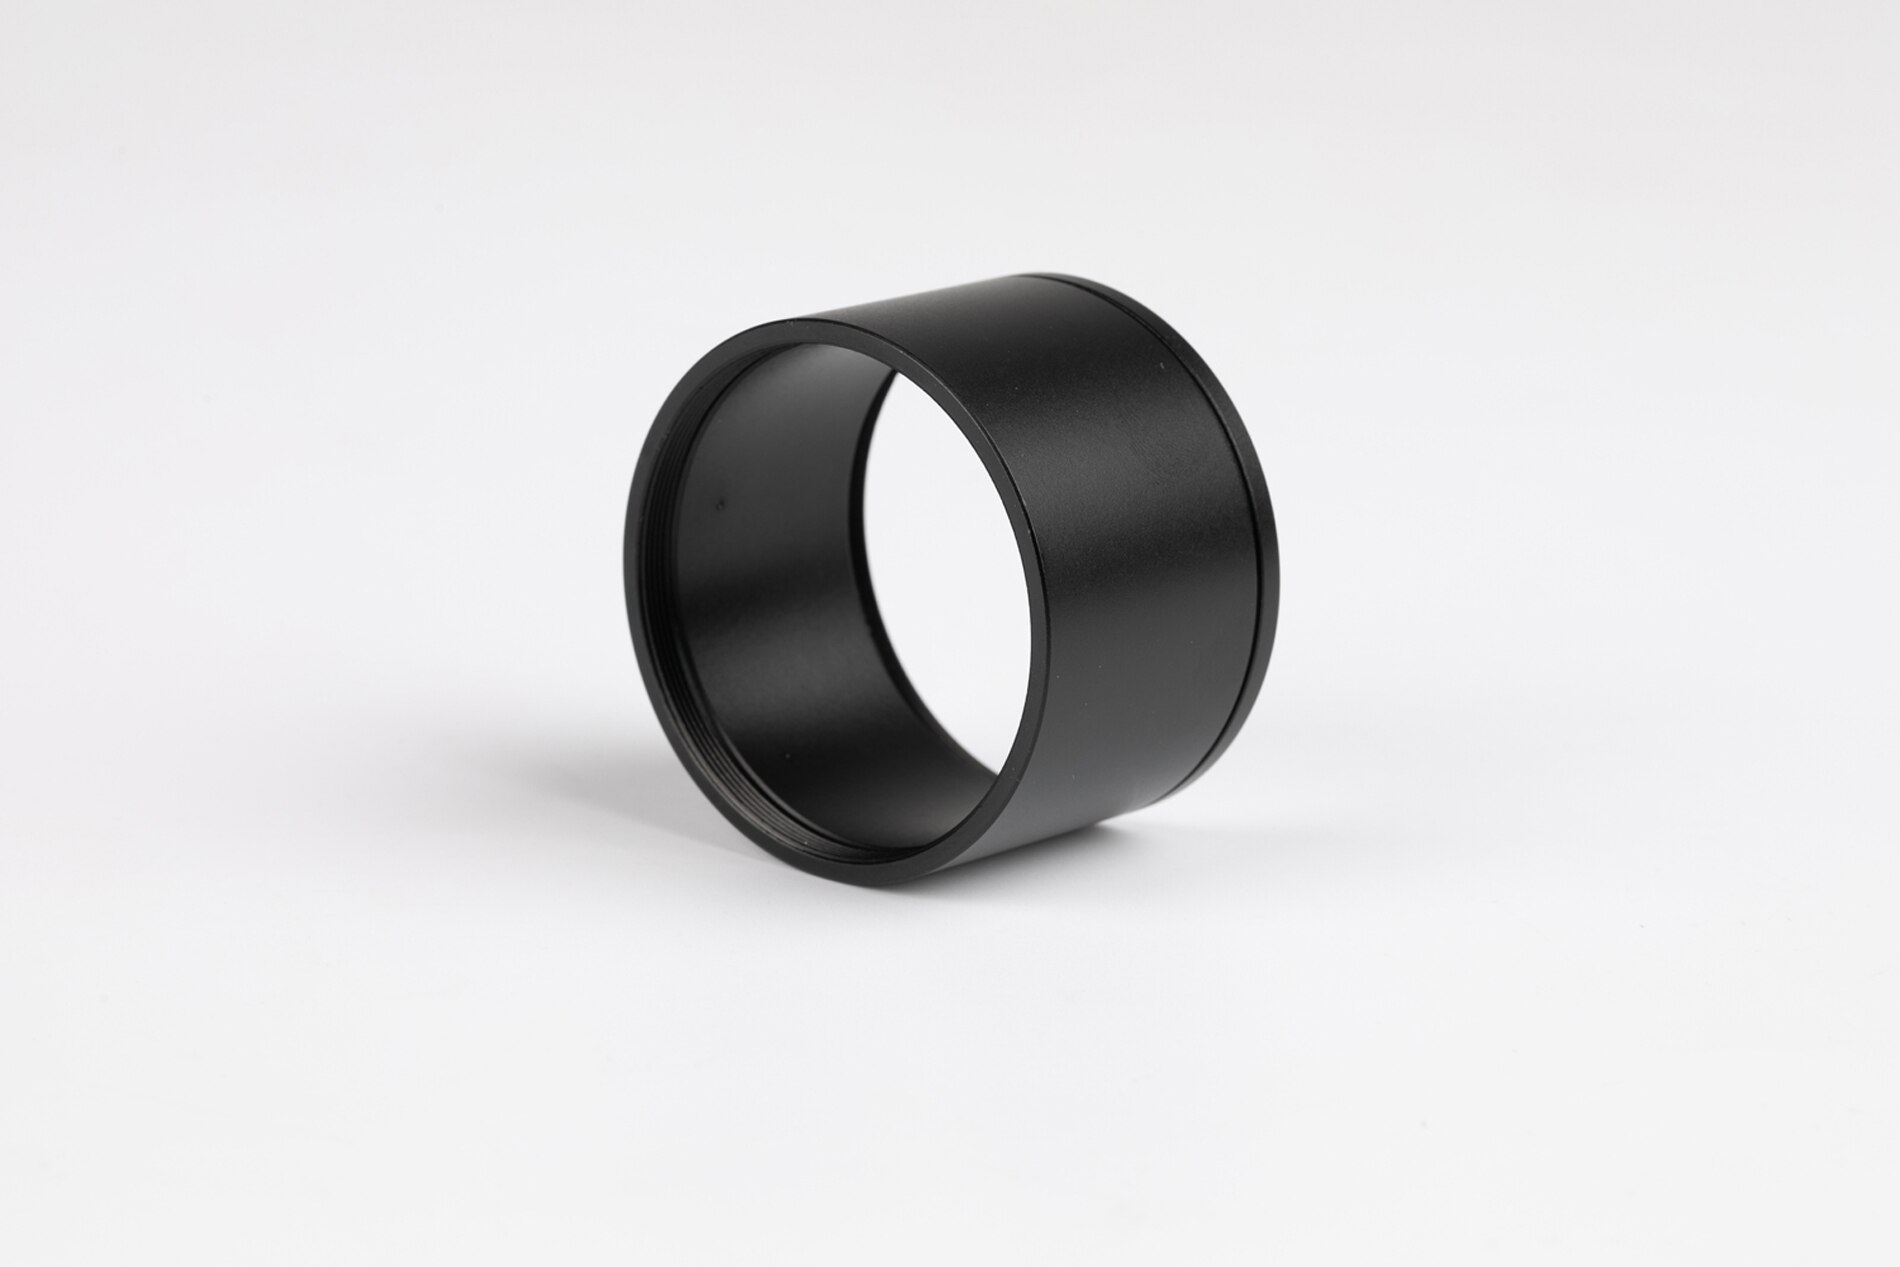 52mm 52mm filter mount Lens Adapter Tube Ring voor Leica X1 X2 XE Camera